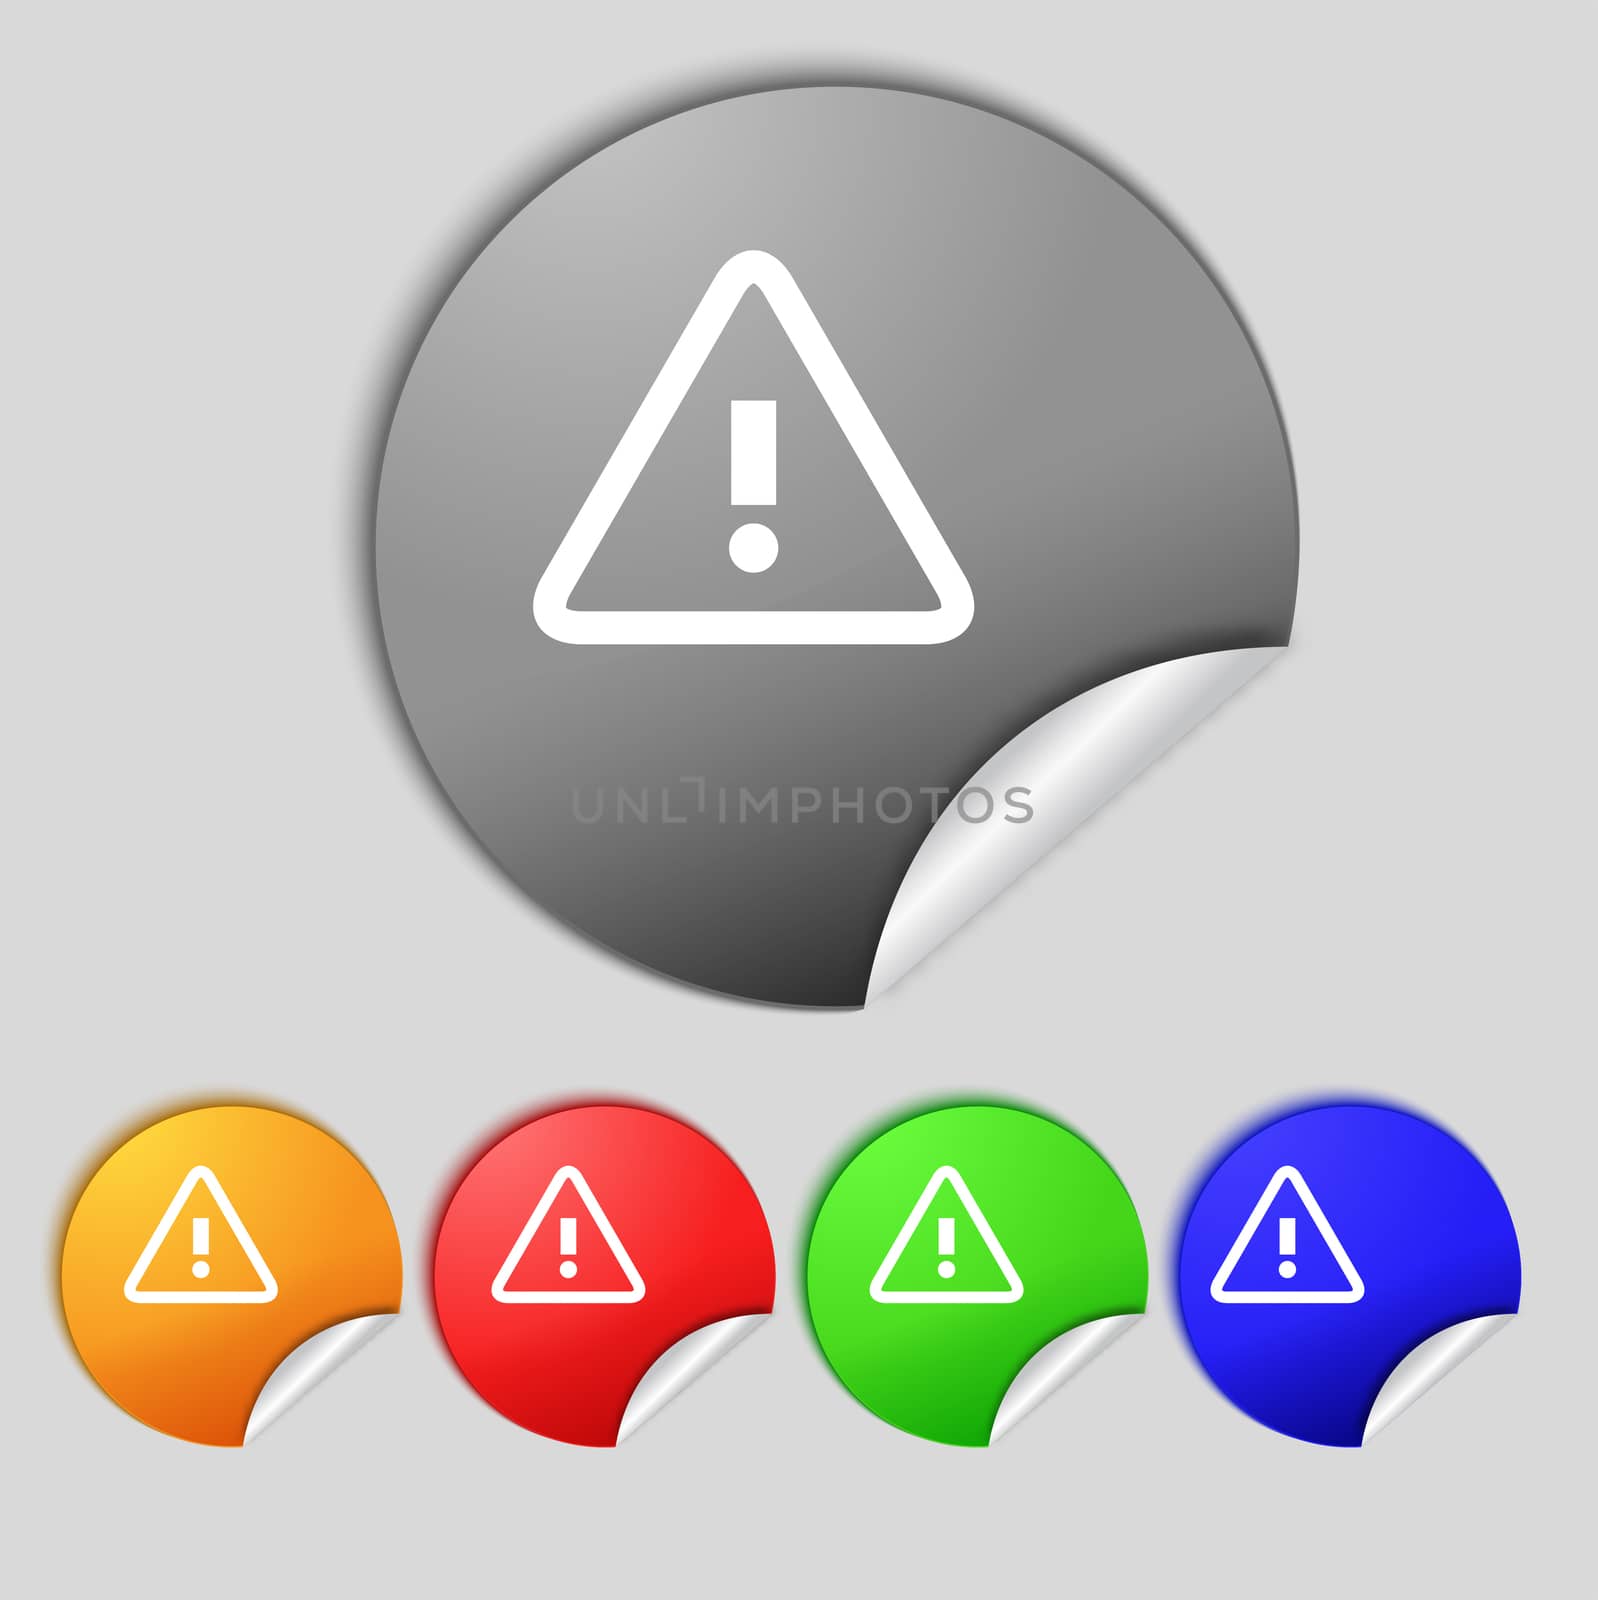 Attention caution sign icon. Exclamation mark. Hazard warning symbol. Set colour buttons  illustration